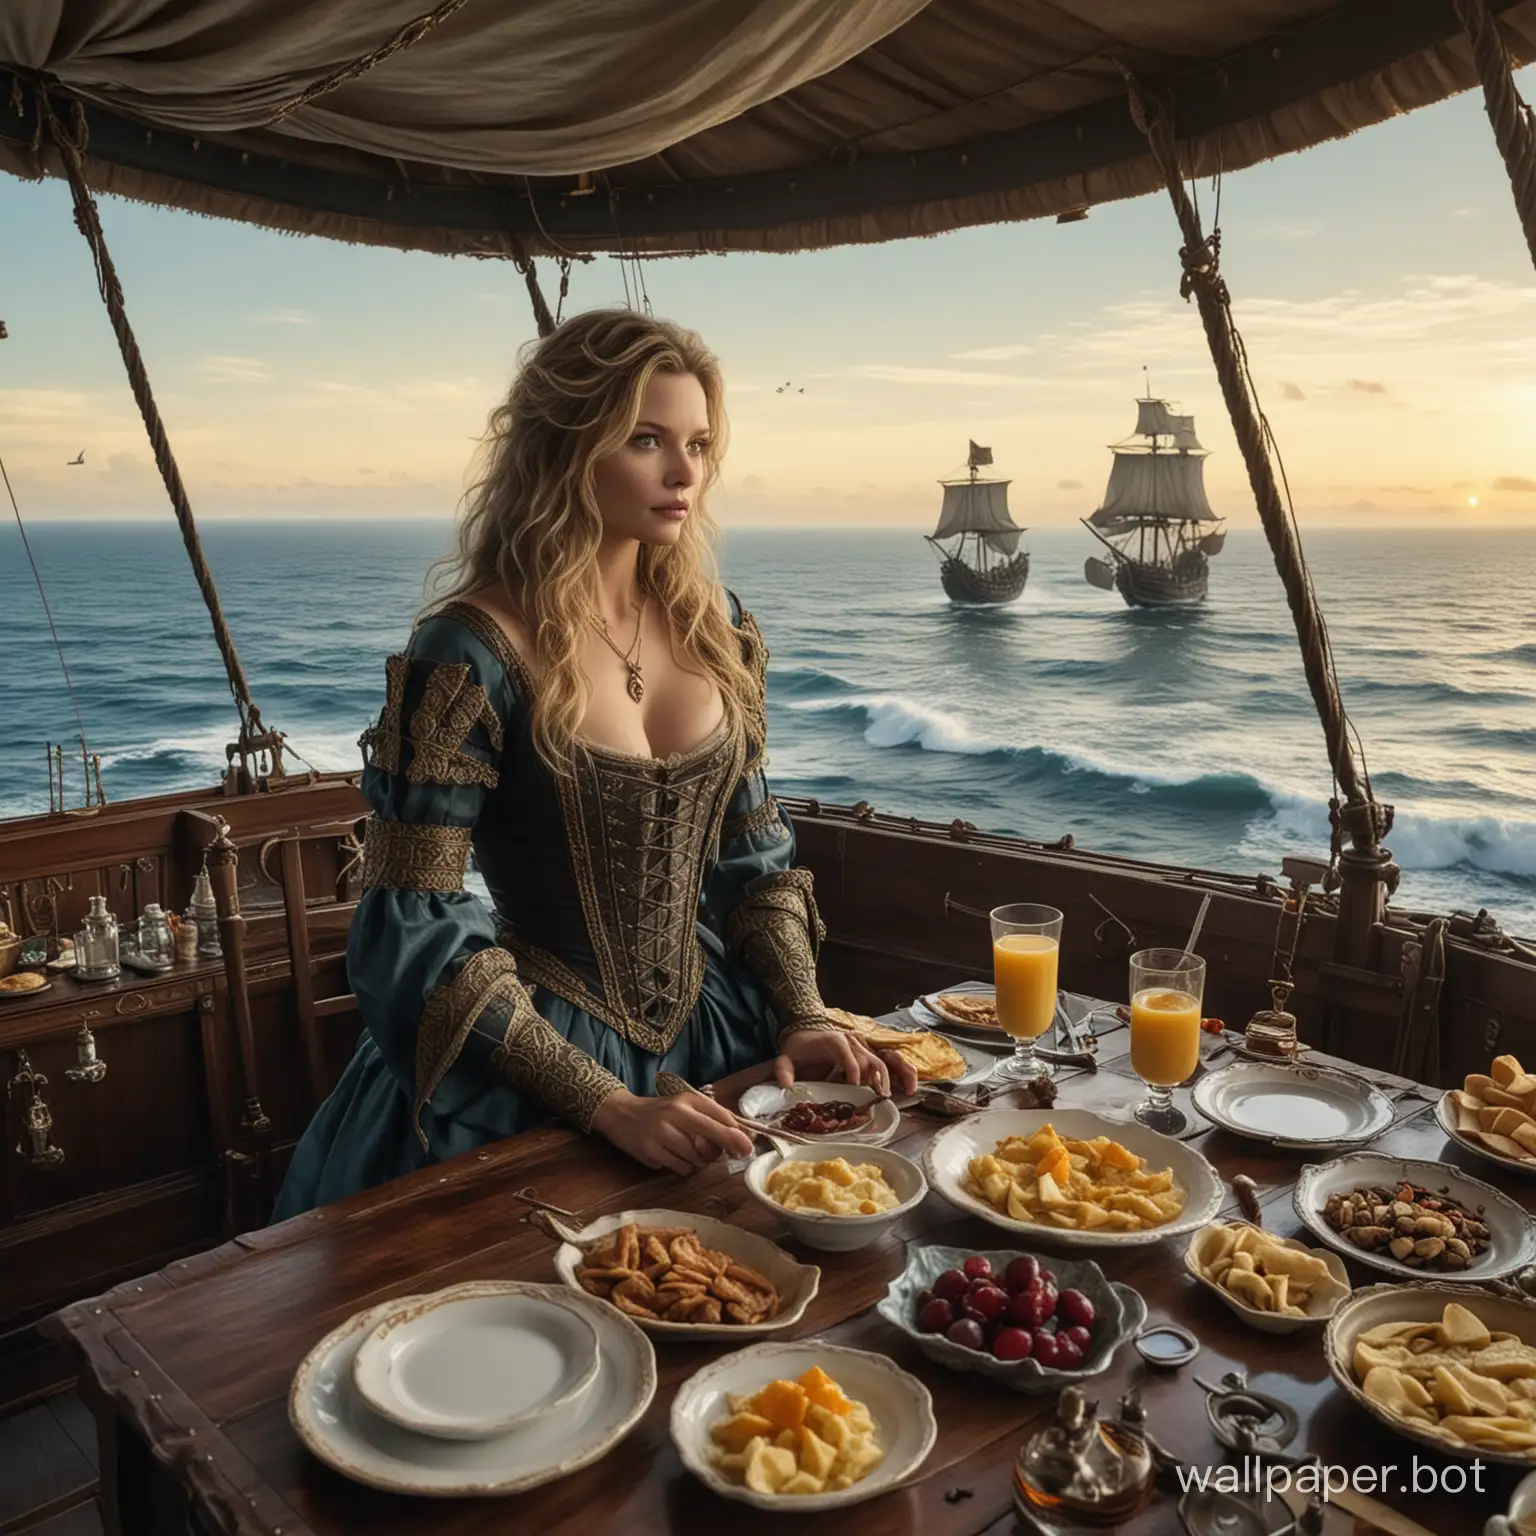 Fantasy-Airship-Overlooking-Endless-Ocean-with-Medieval-Ships-Michelle-Pfeiffer-in-Warrior-Costume-Breakfast-Scene